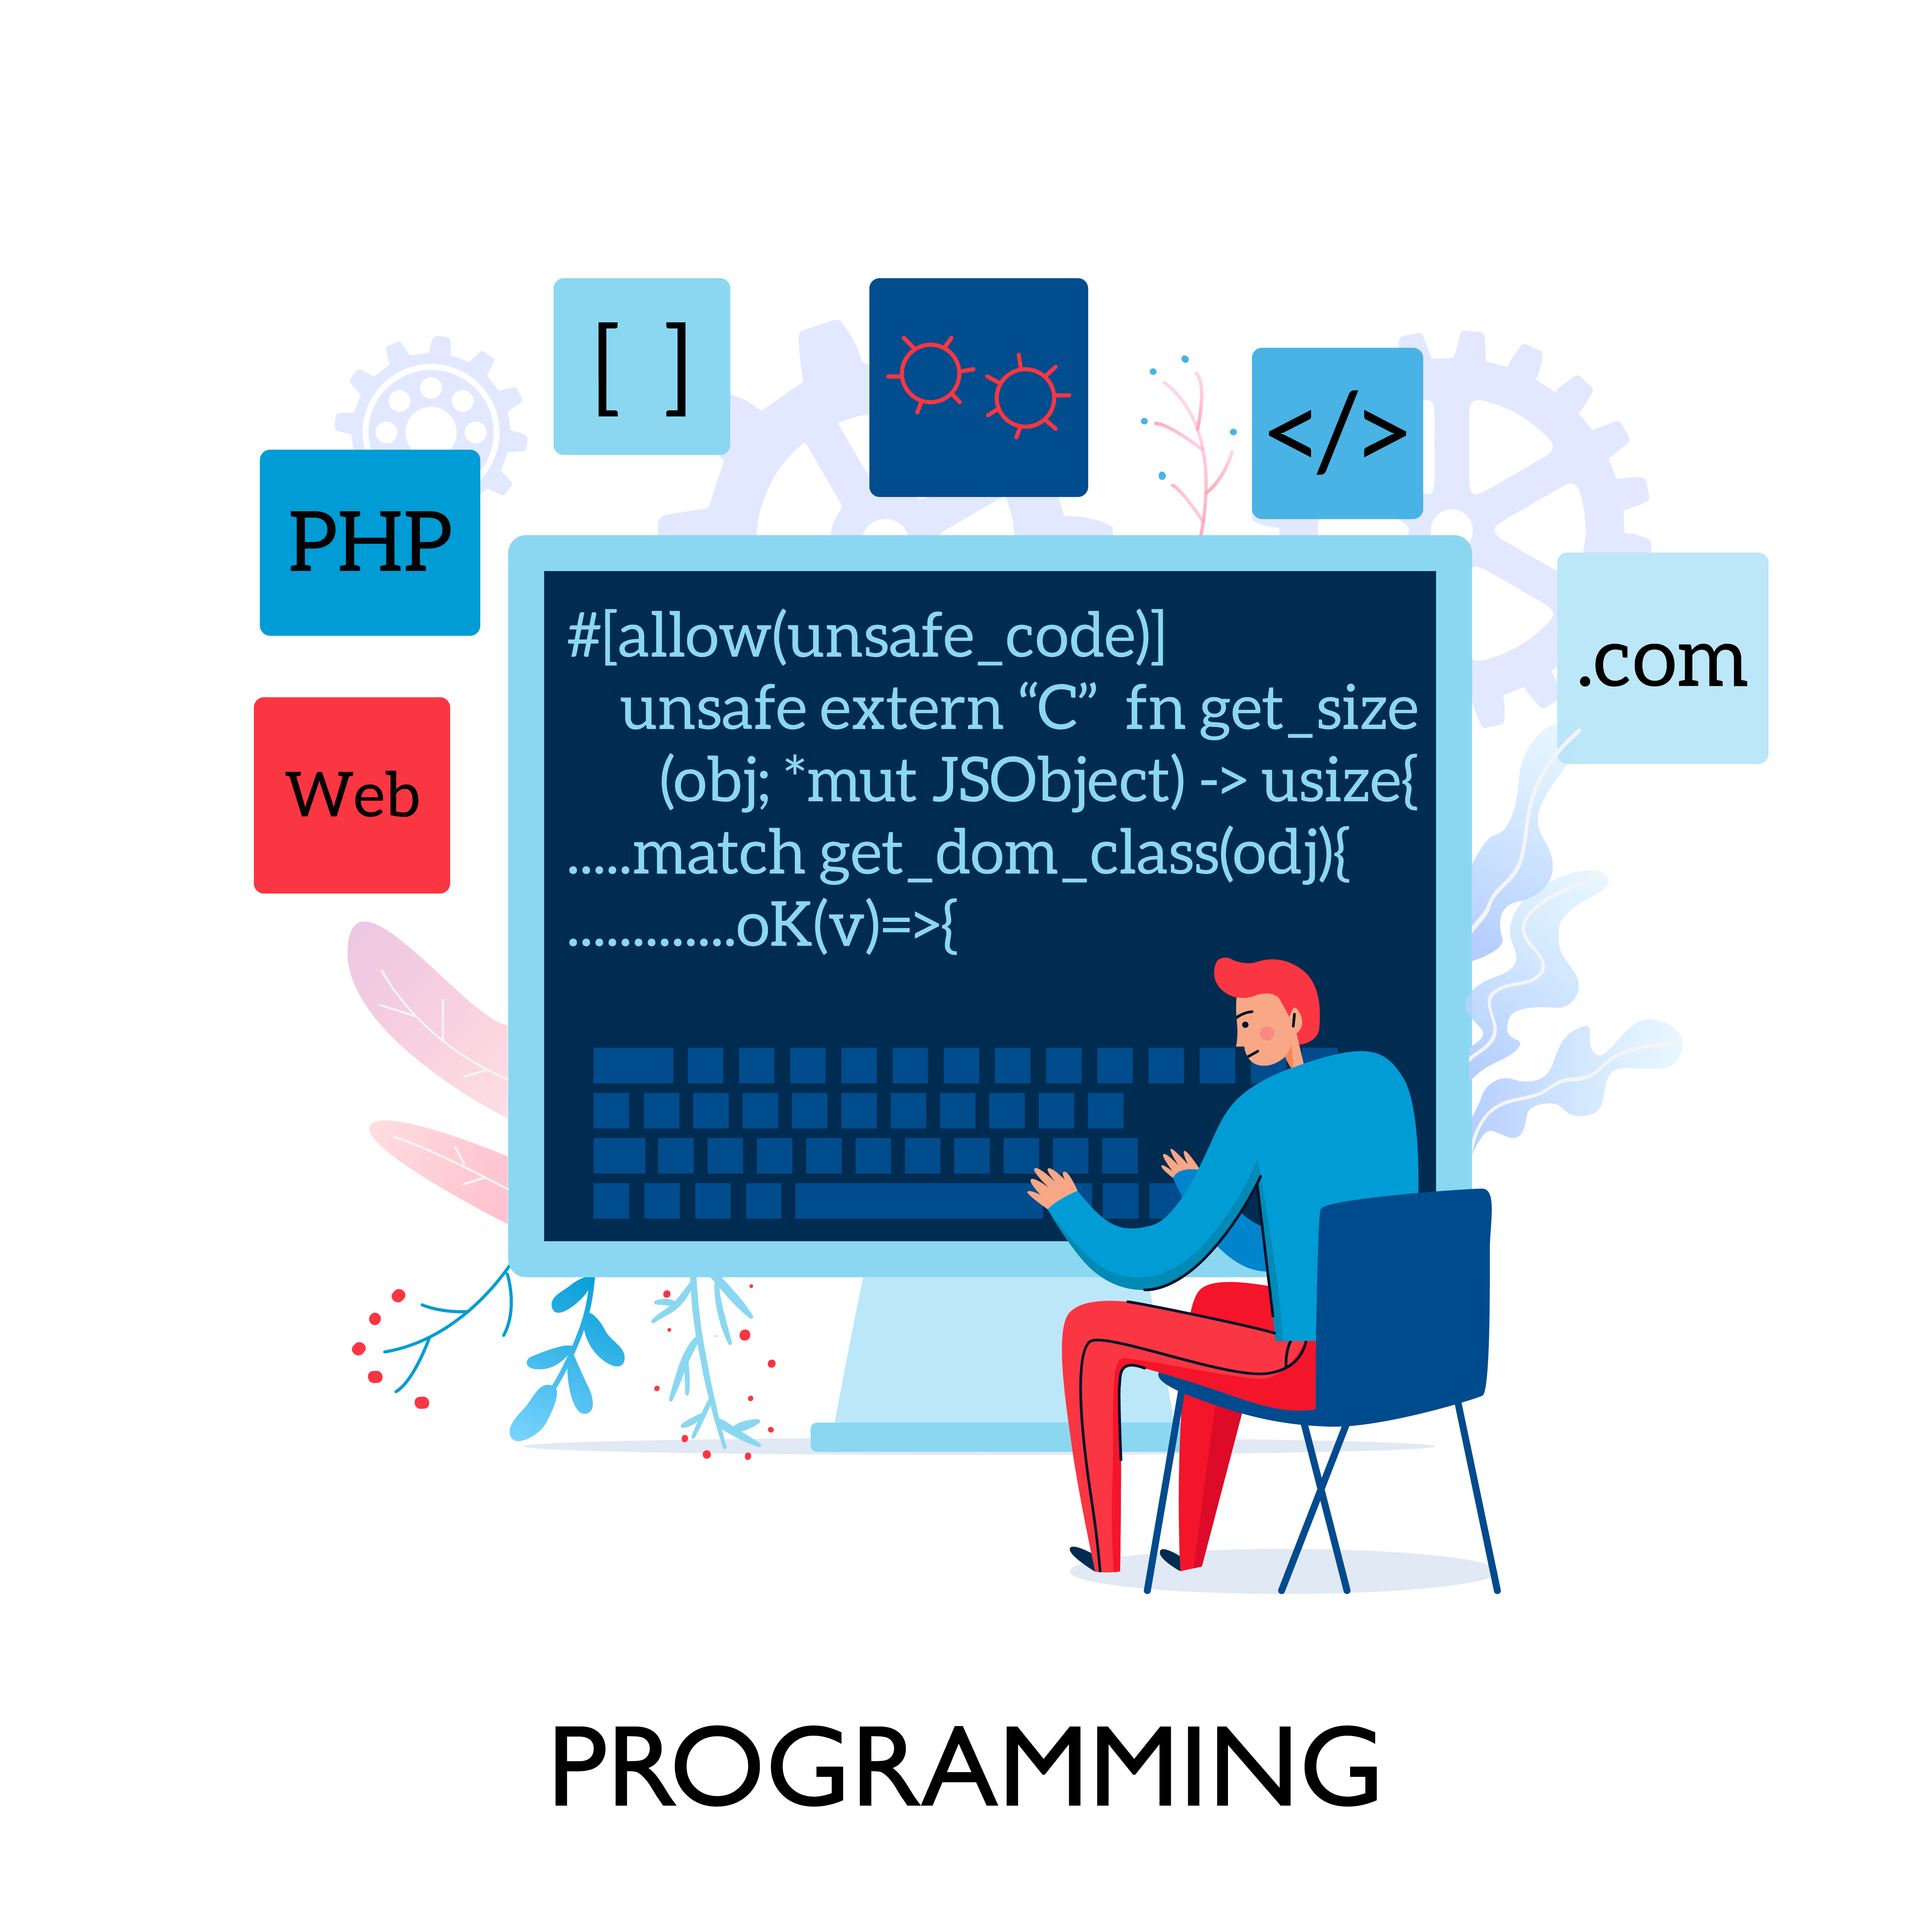 What are the 5 basic programming languages